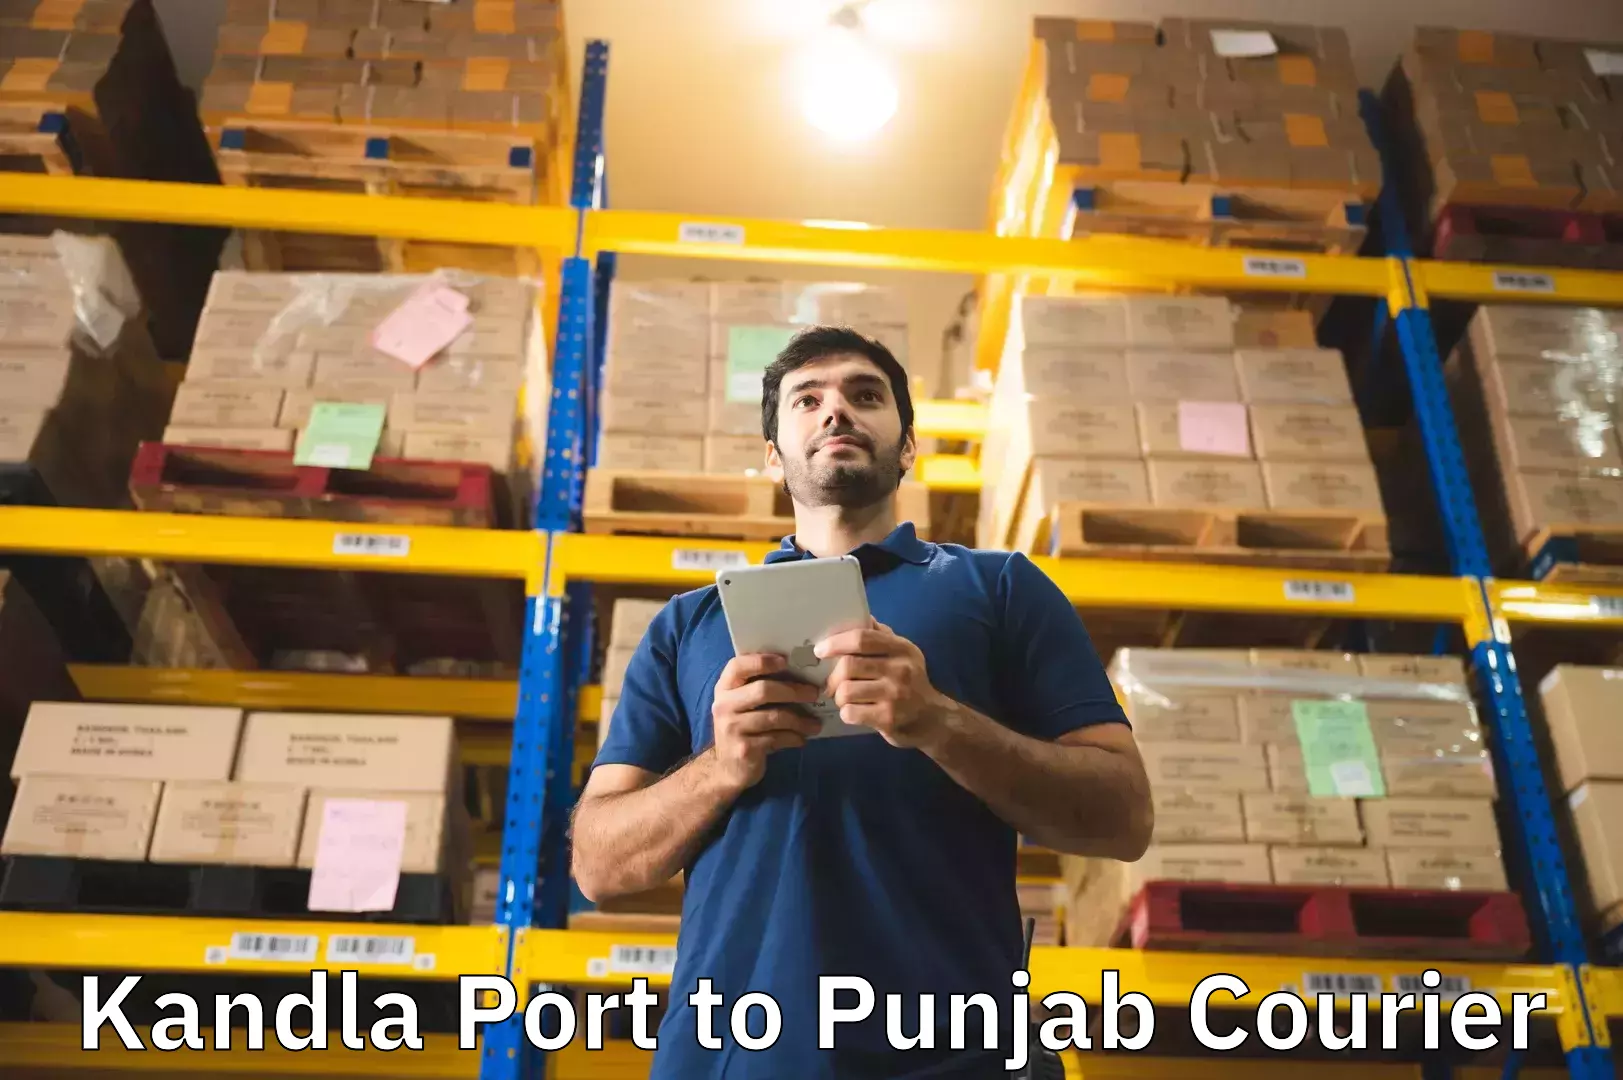 Luggage courier network Kandla Port to Sultanpur Lodhi